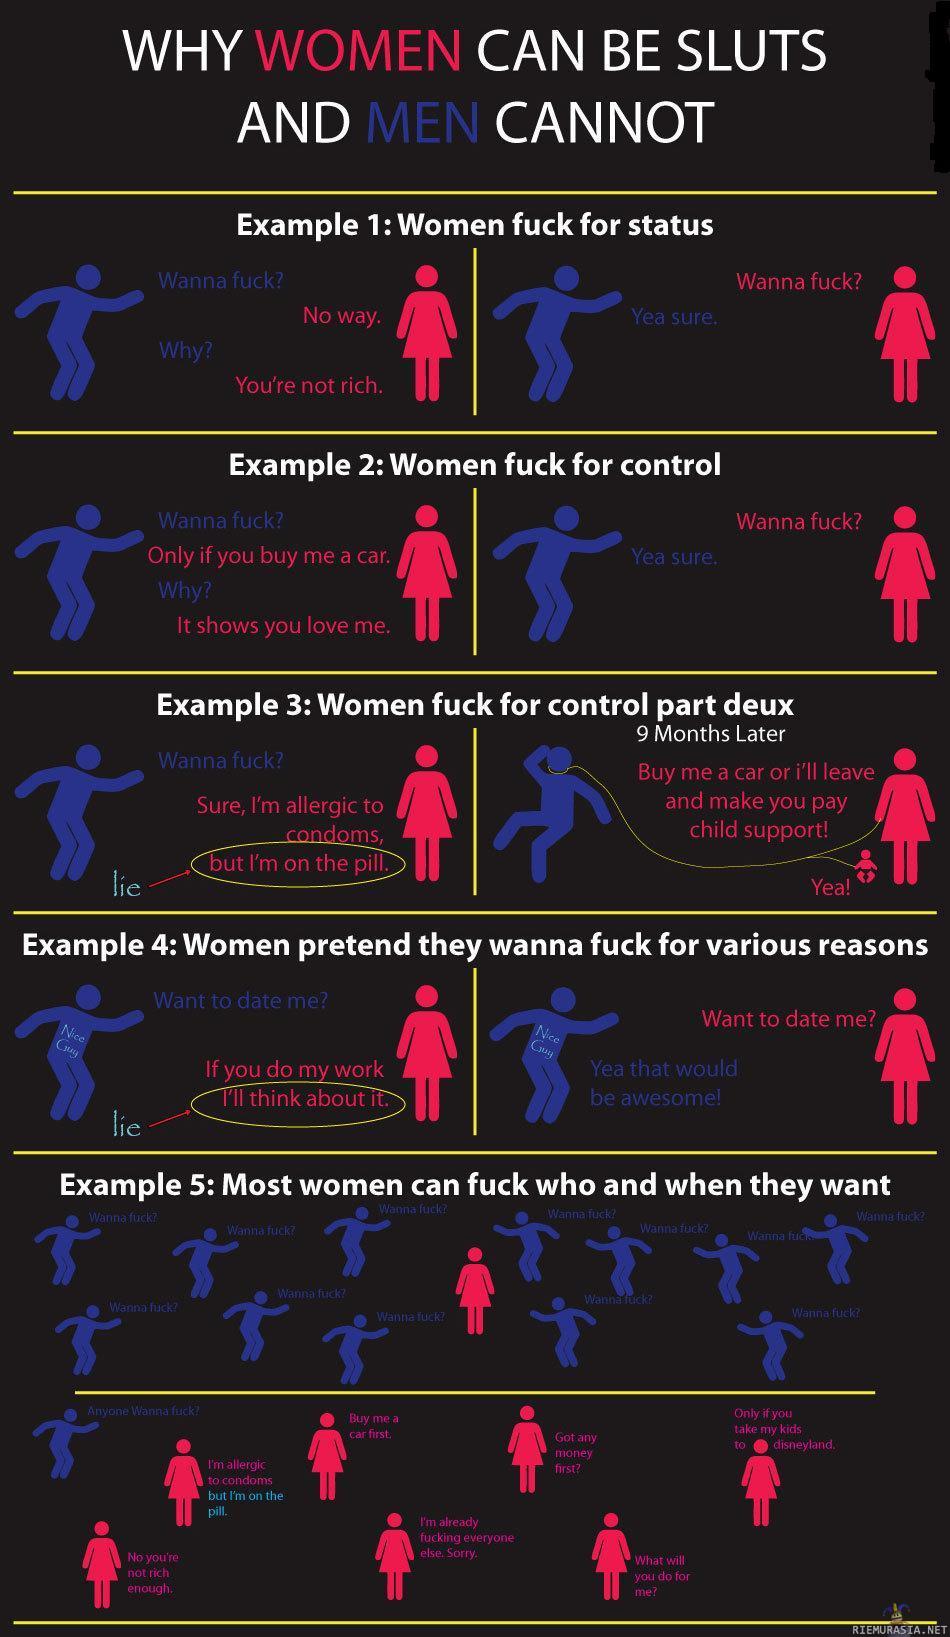 Why women can be sluts and men cannot.